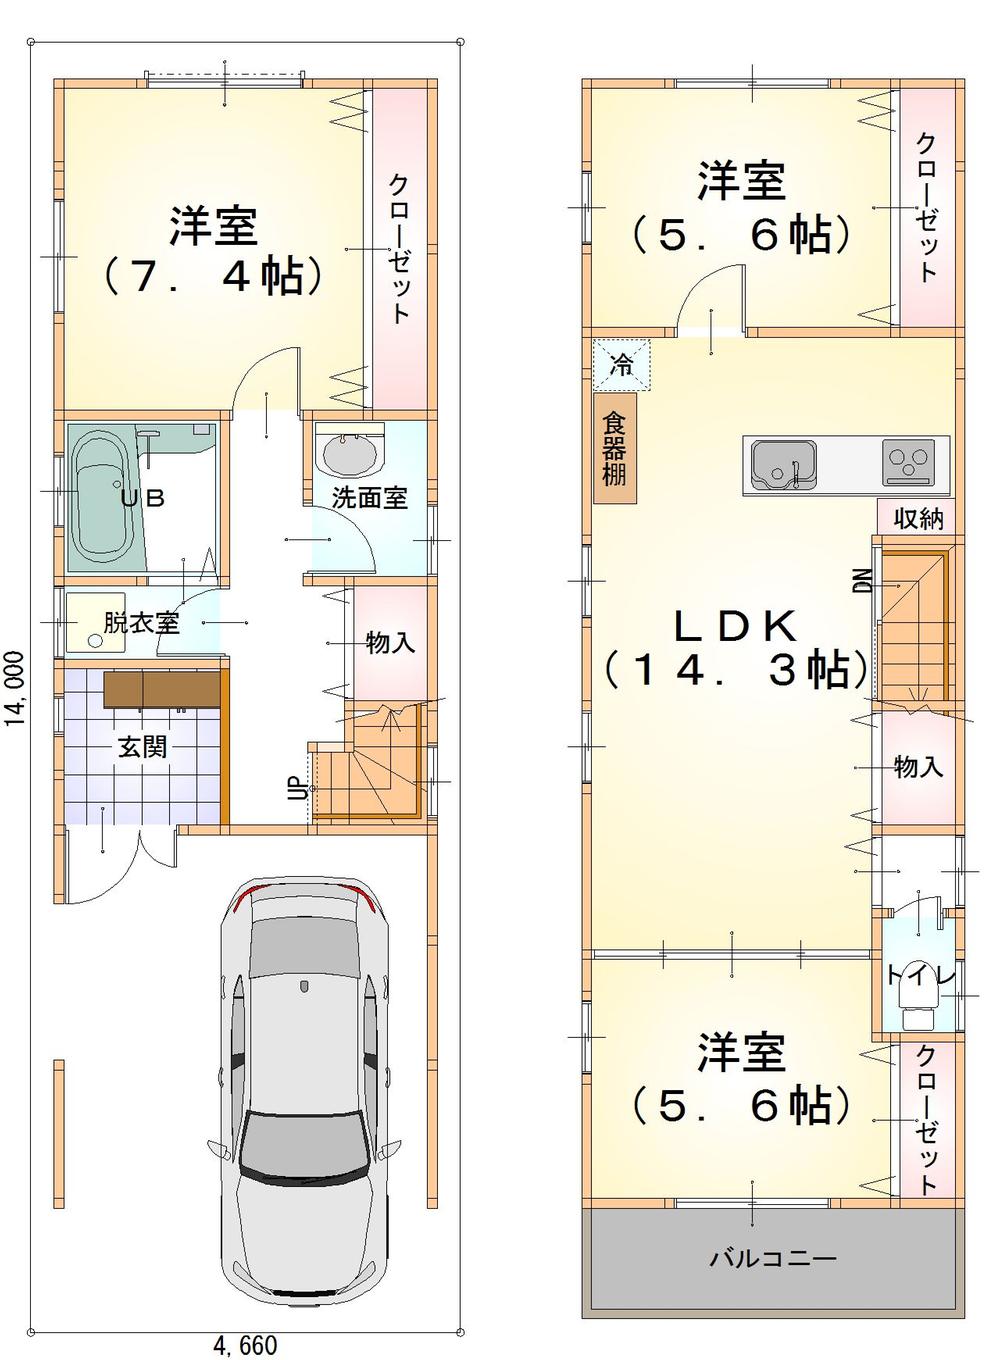 Building plan example (floor plan). Building plan example Building price 10.6 million yen (2-story) Building area of ​​approximately 82.02 sq m